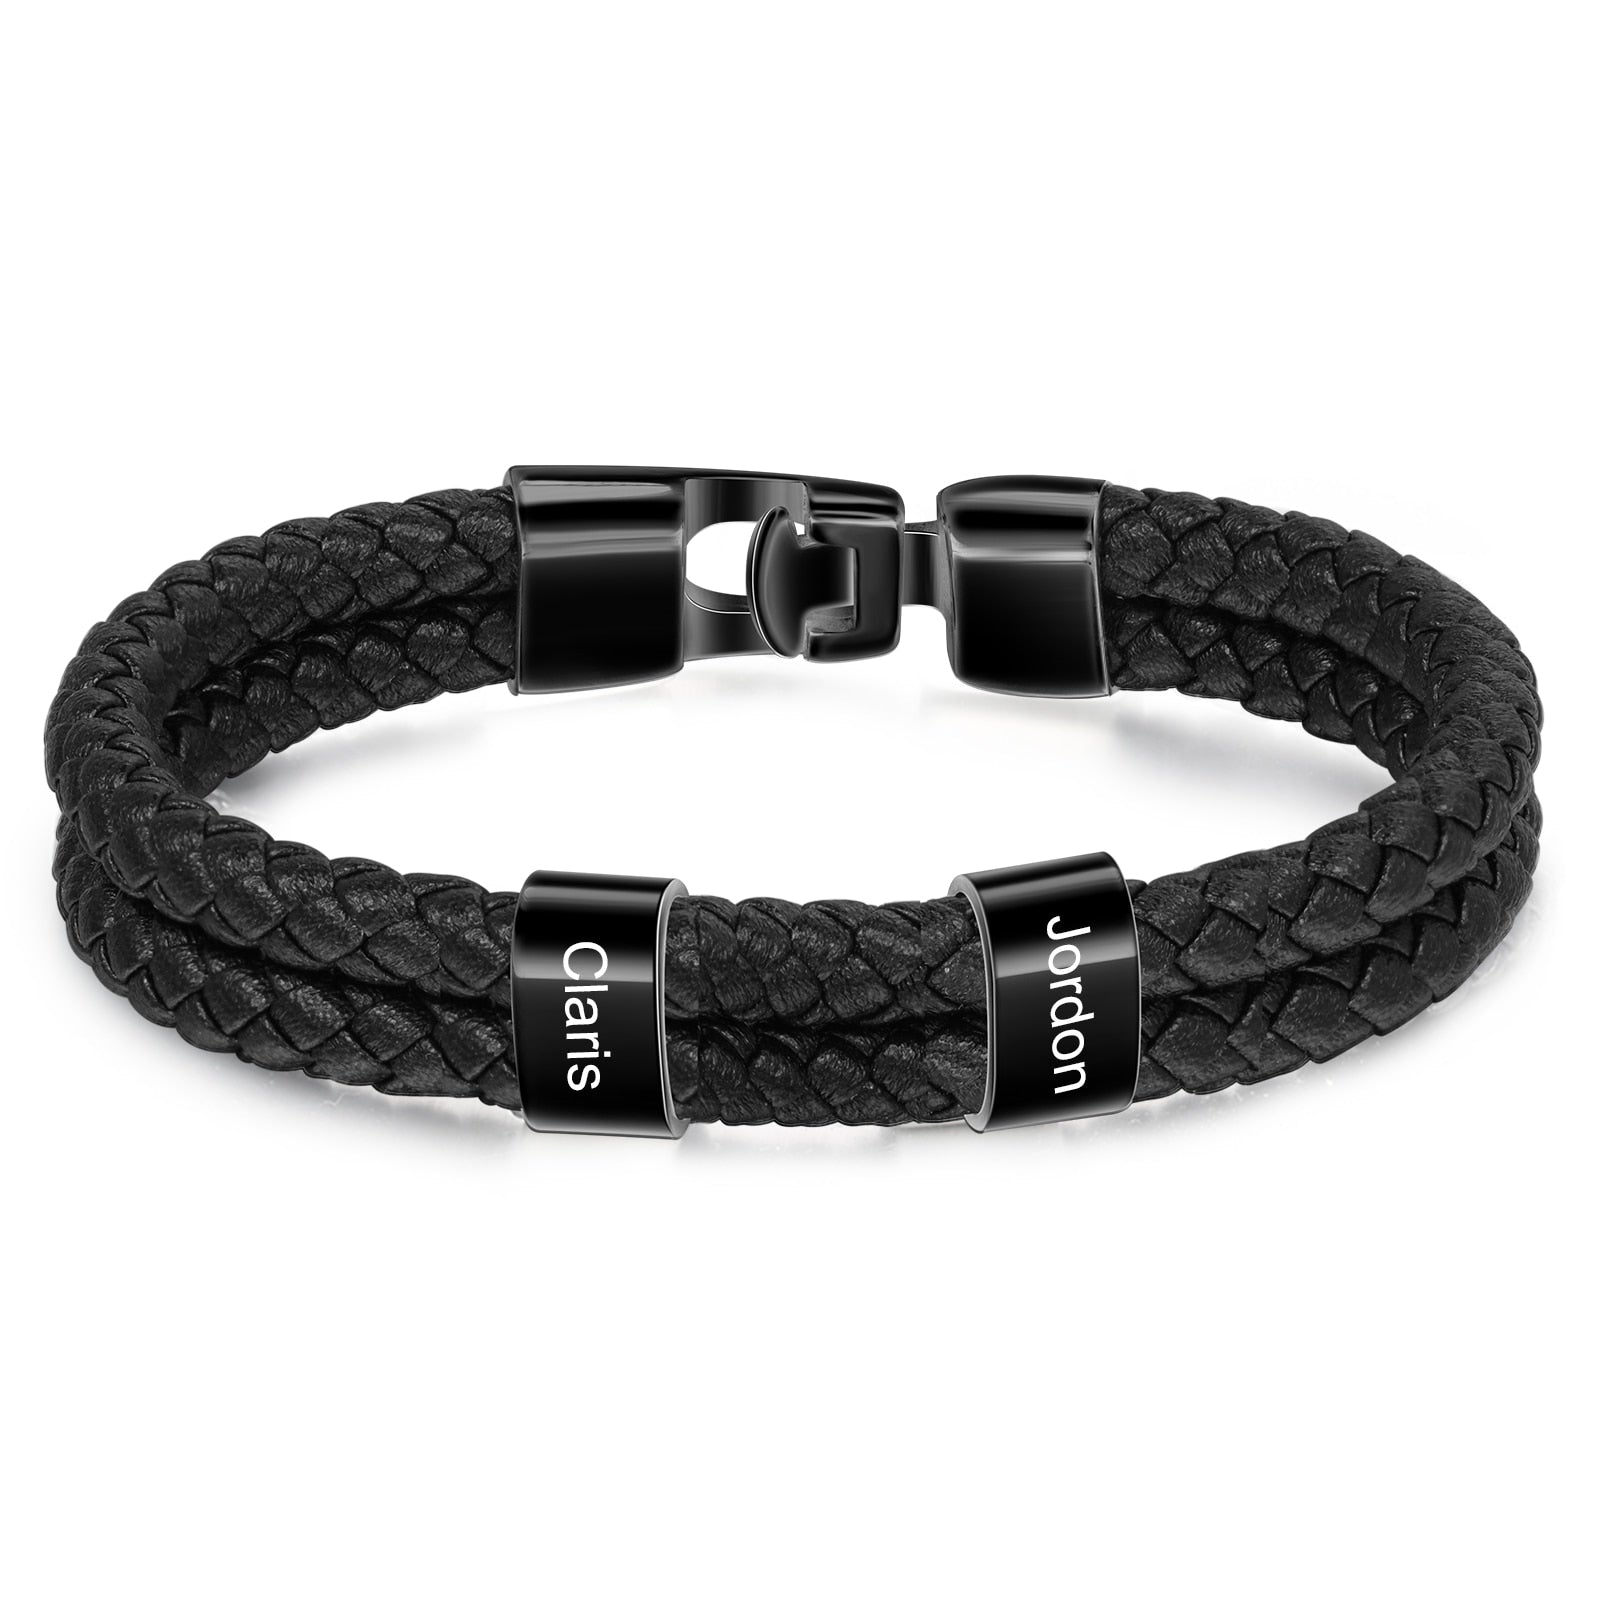 Personalized Engraved Family Name Beads Bracelets Black Braided Leather Stainless Steel Bracelets for Men Fathers